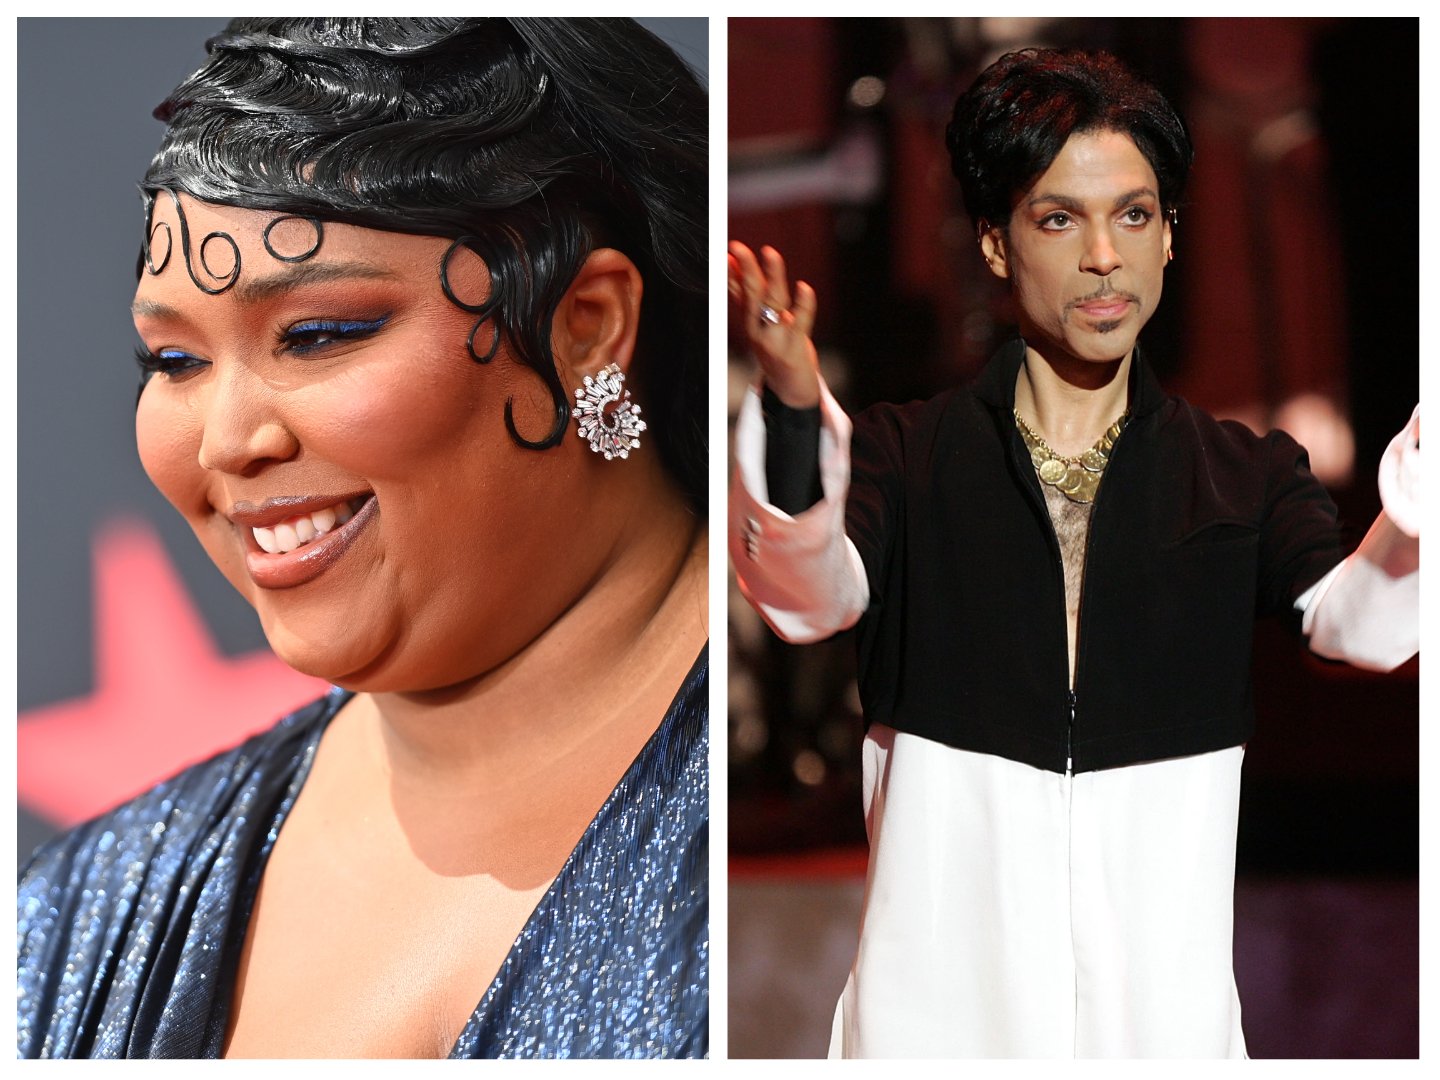 Lizzo, smiling in a blue dress, and Prince, wearing a black and white outfit.